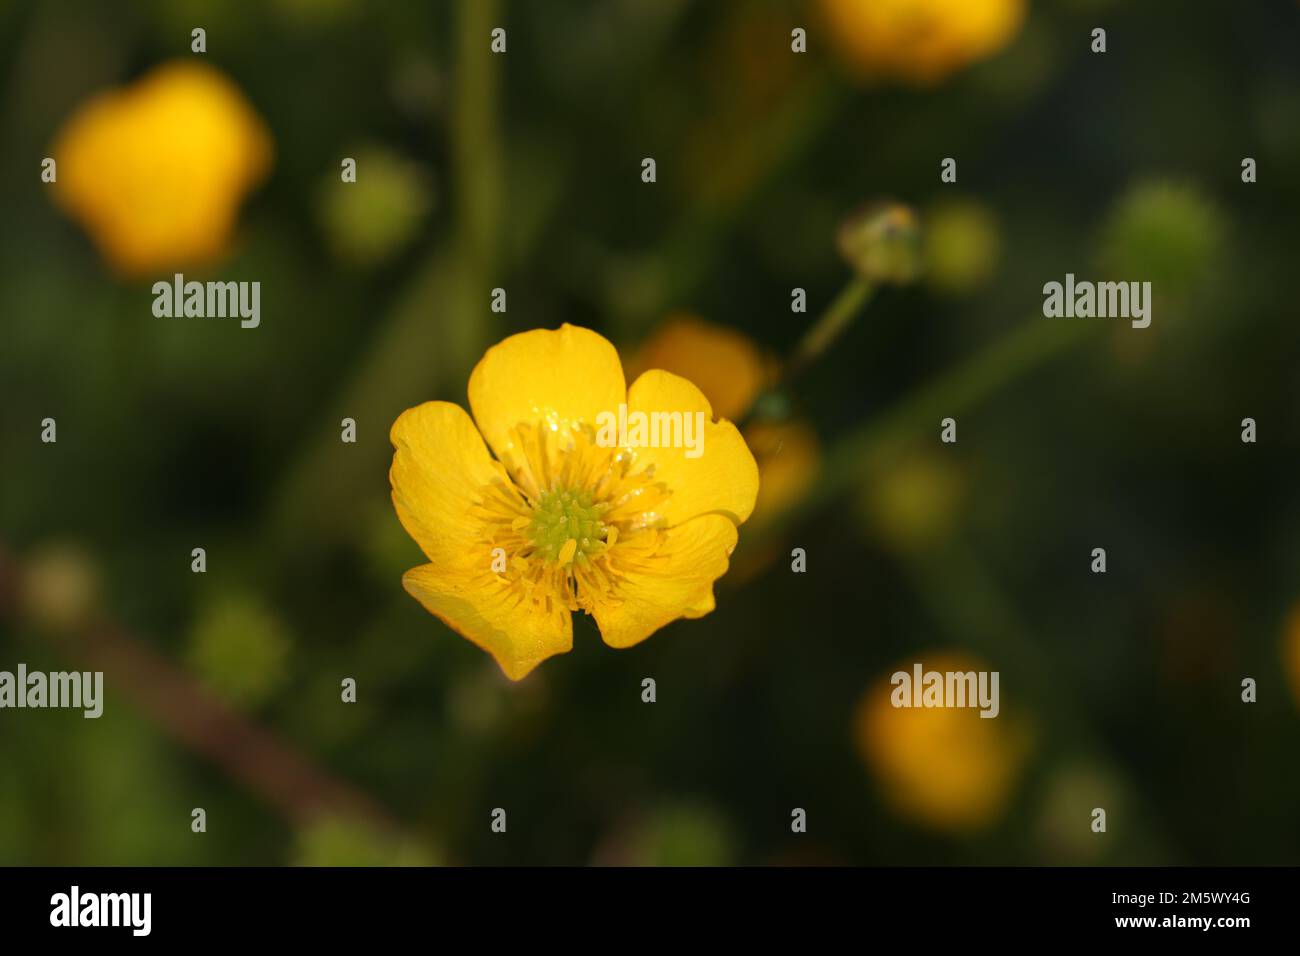 A closeup shot of a yellow celery-leaved buttercup in a garden in daylight on a blurred background Stock Photo